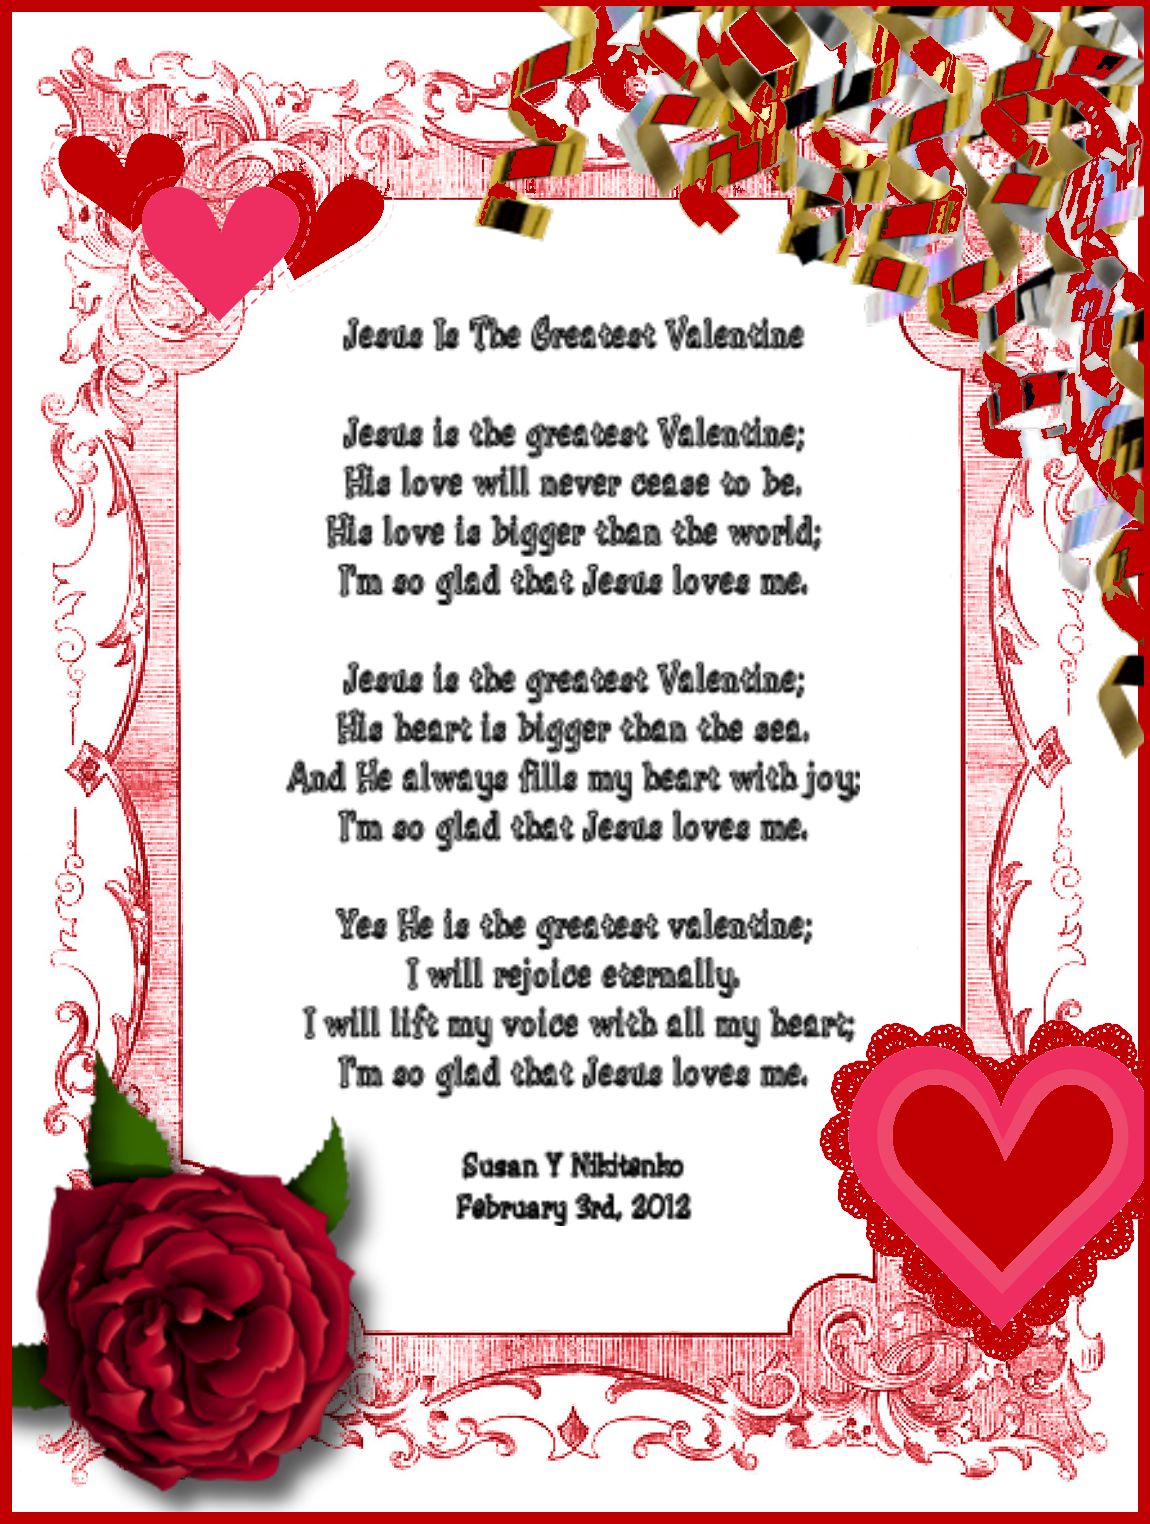 Jesus Is The Greatest Valentine Poem Poster And Music Restored